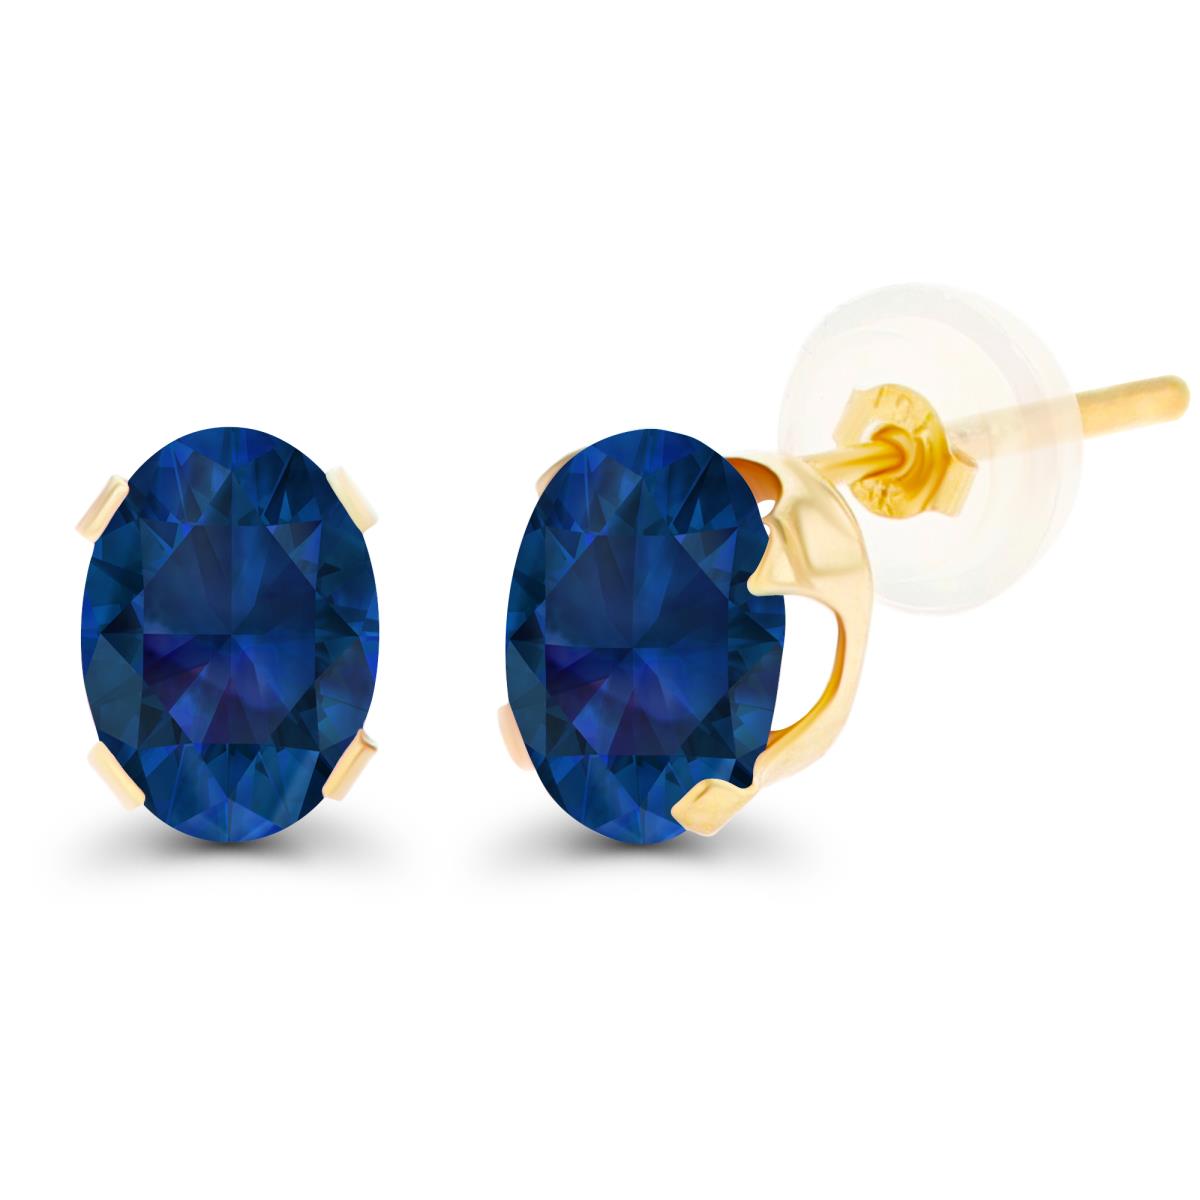 Sterling Silver Yellow 7x5mm Oval Cr Blue Sapphire Stud Earring with Clutch